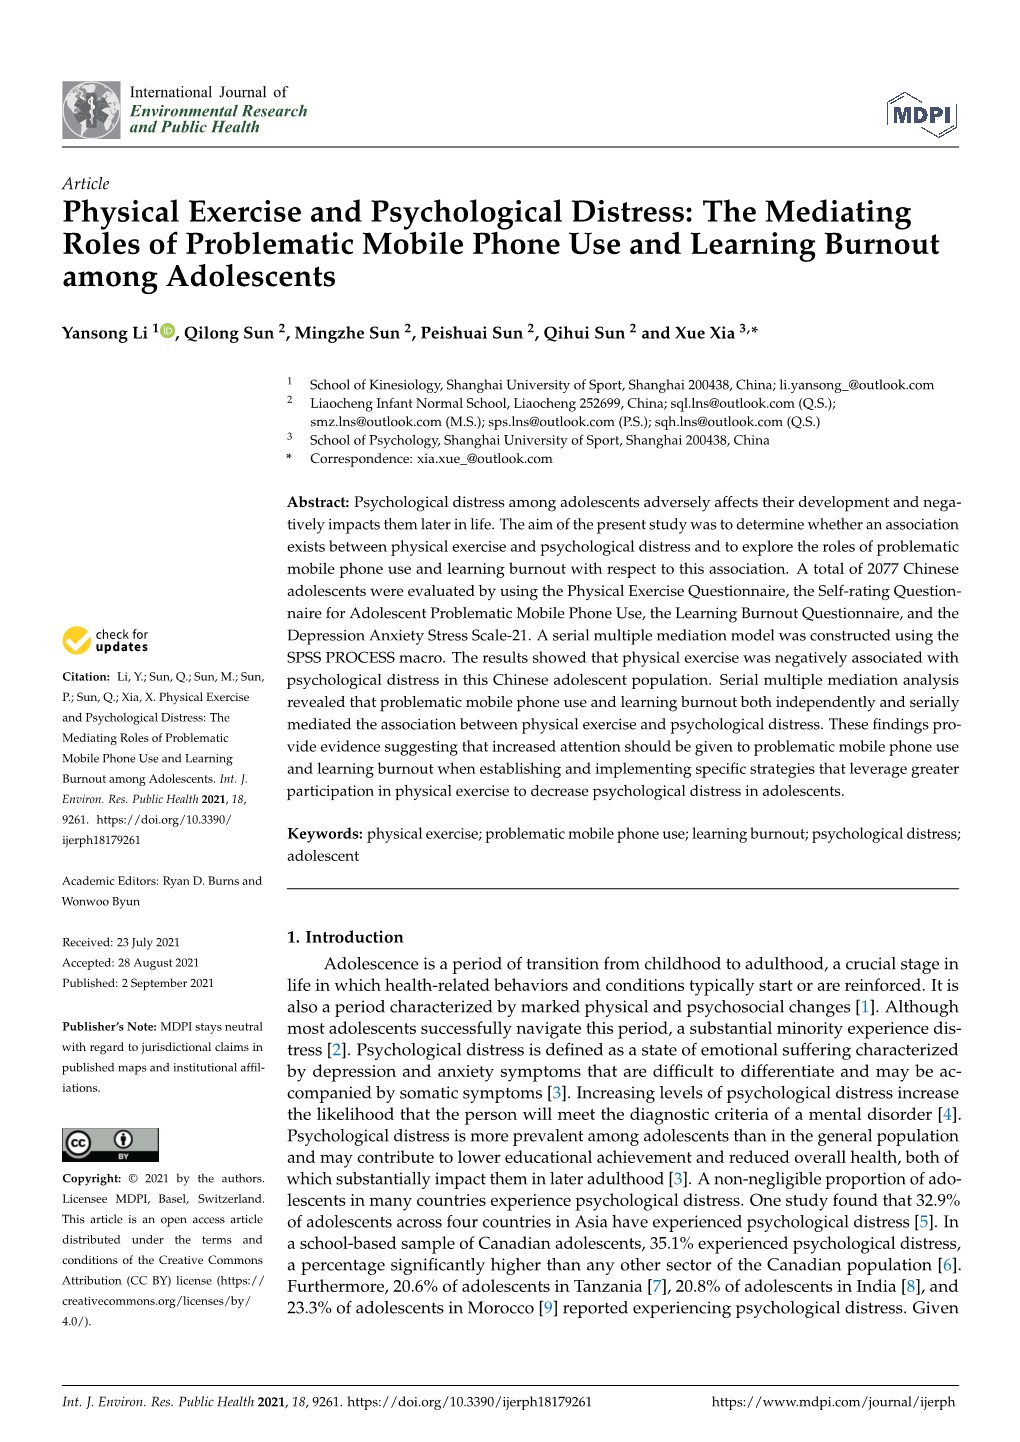 Physical Exercise and Psychological Distress: the Mediating Roles of Problematic Mobile Phone Use and Learning Burnout Among Adolescents